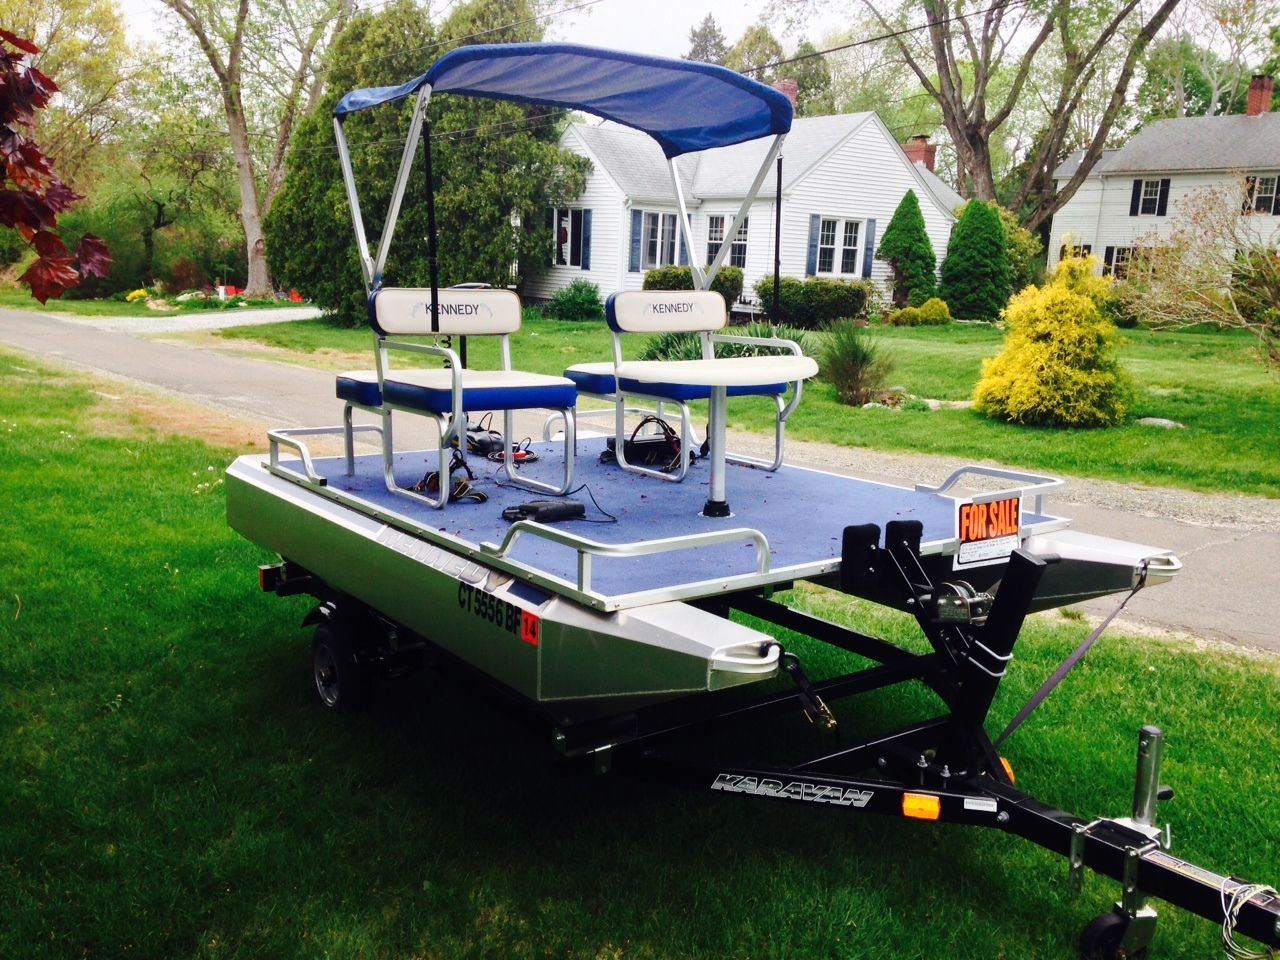 Kennedy Mini Toon 2013 for sale for $3,795 - Boats-from ...